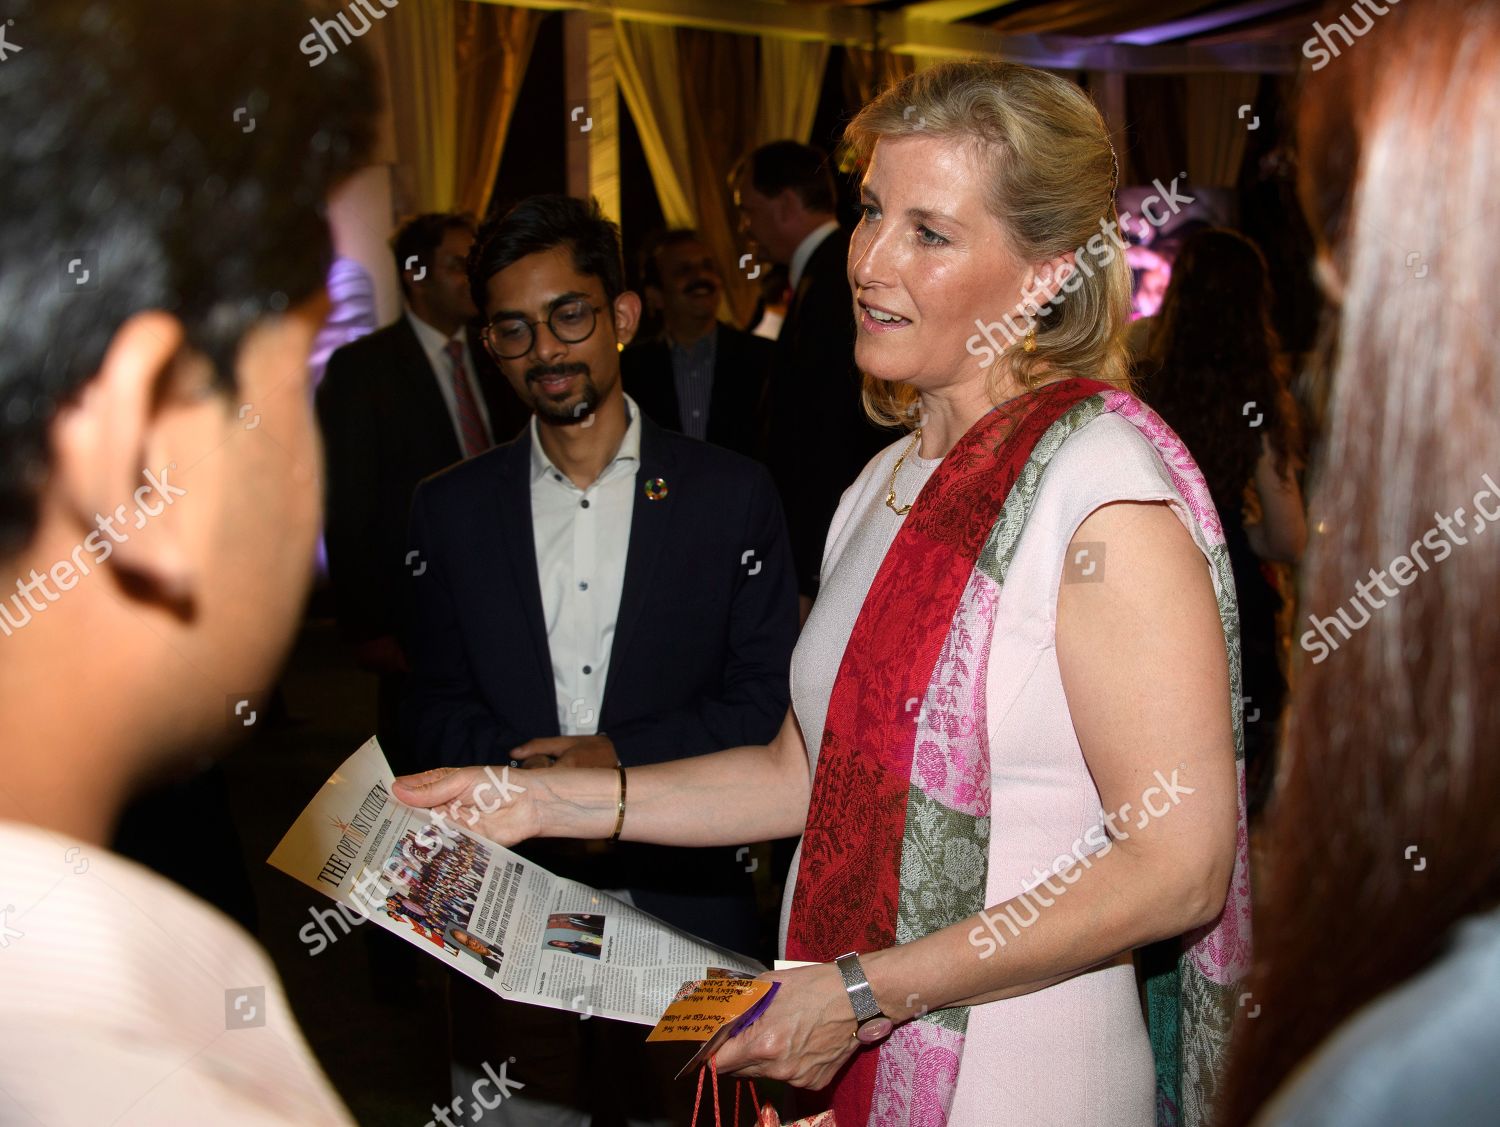 sophie-countess-of-wessex-visit-to-india-shutterstock-editorial-10226793q.jpg